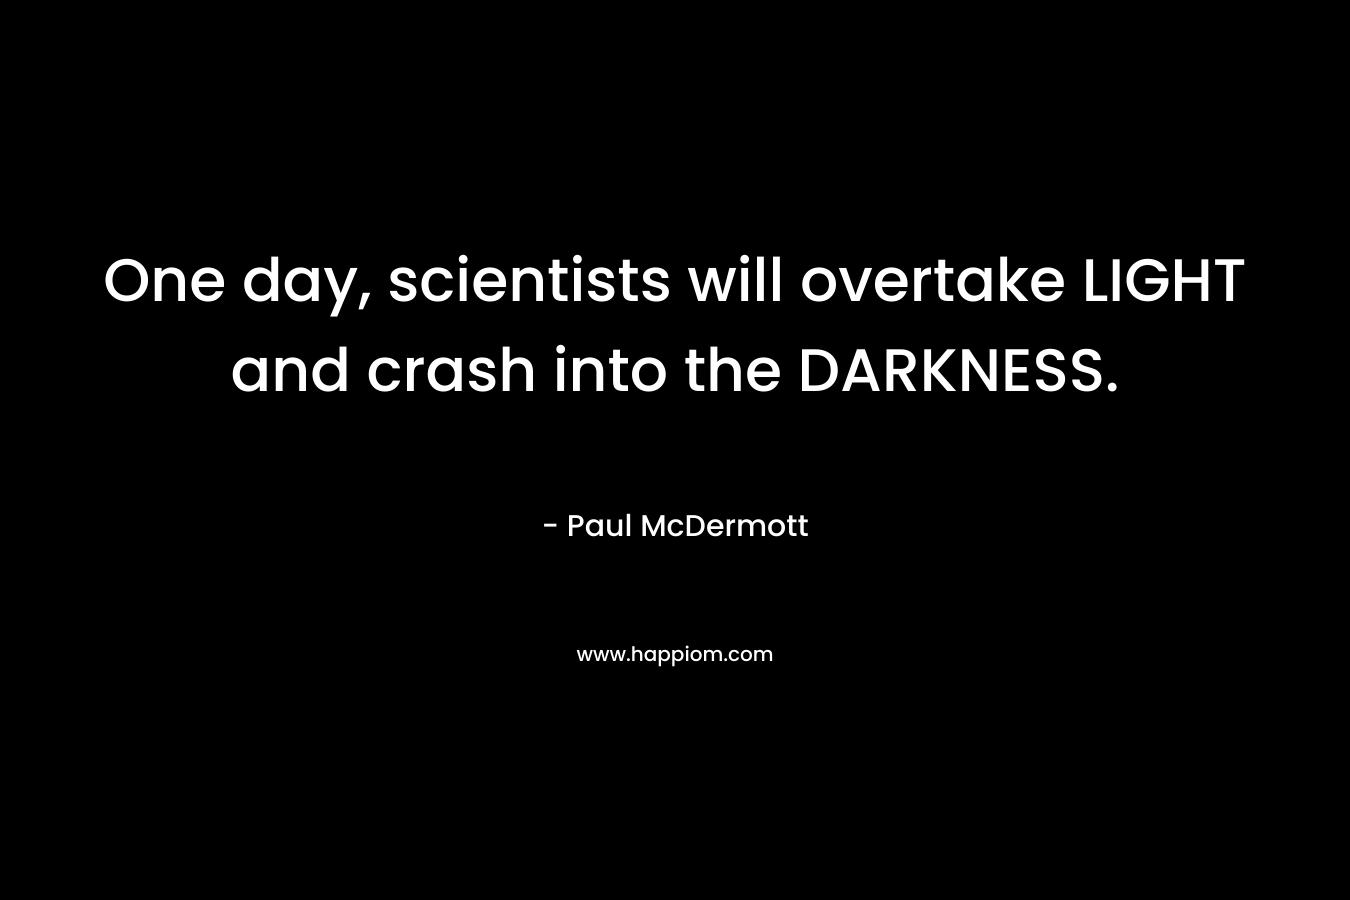 One day, scientists will overtake LIGHT and crash into the DARKNESS.